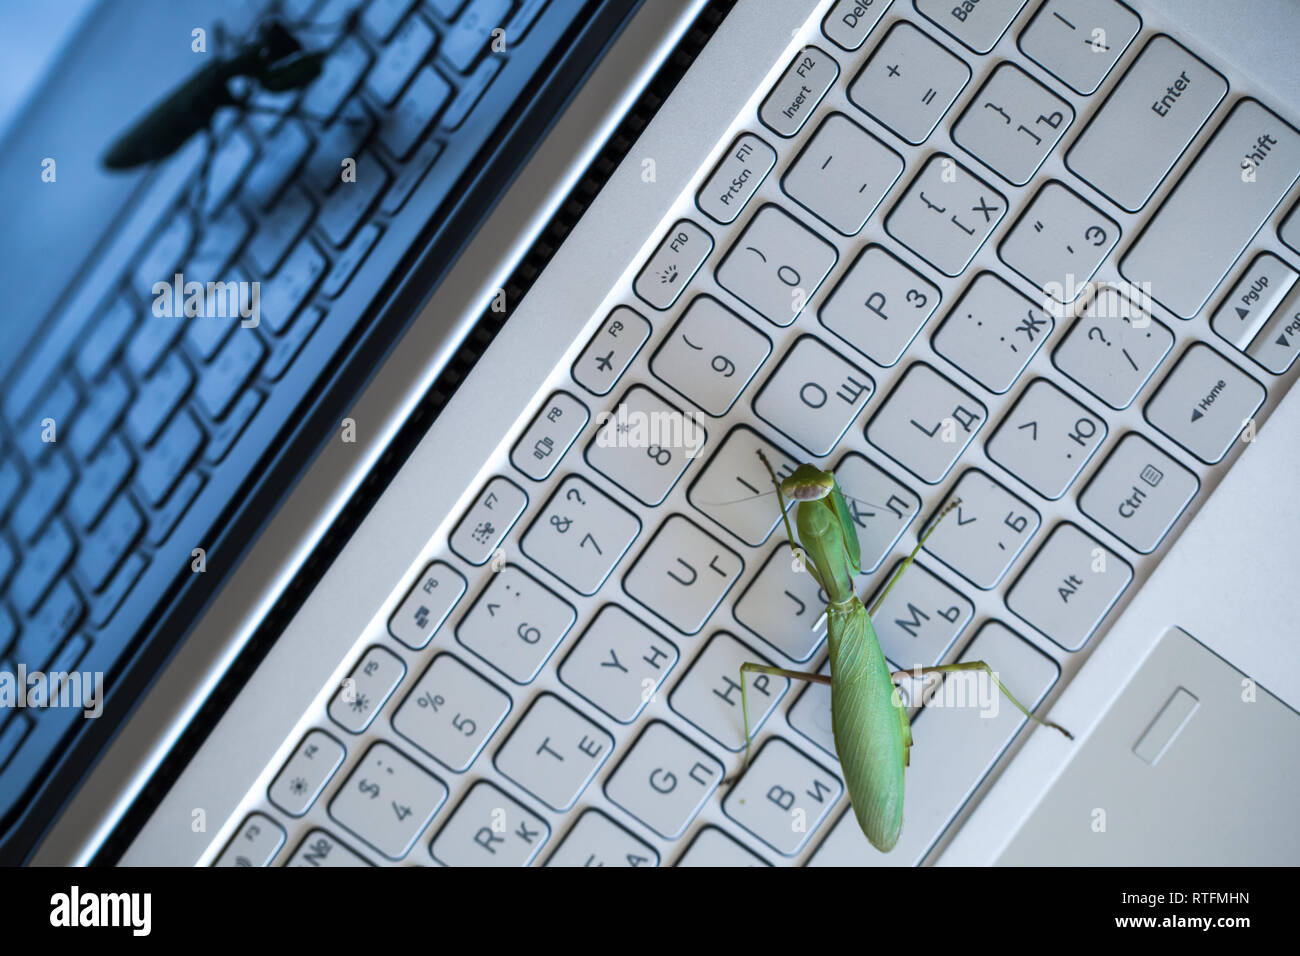 Software bug metaphor, green mantis is on a laptop keyboard, top view Stock Photo